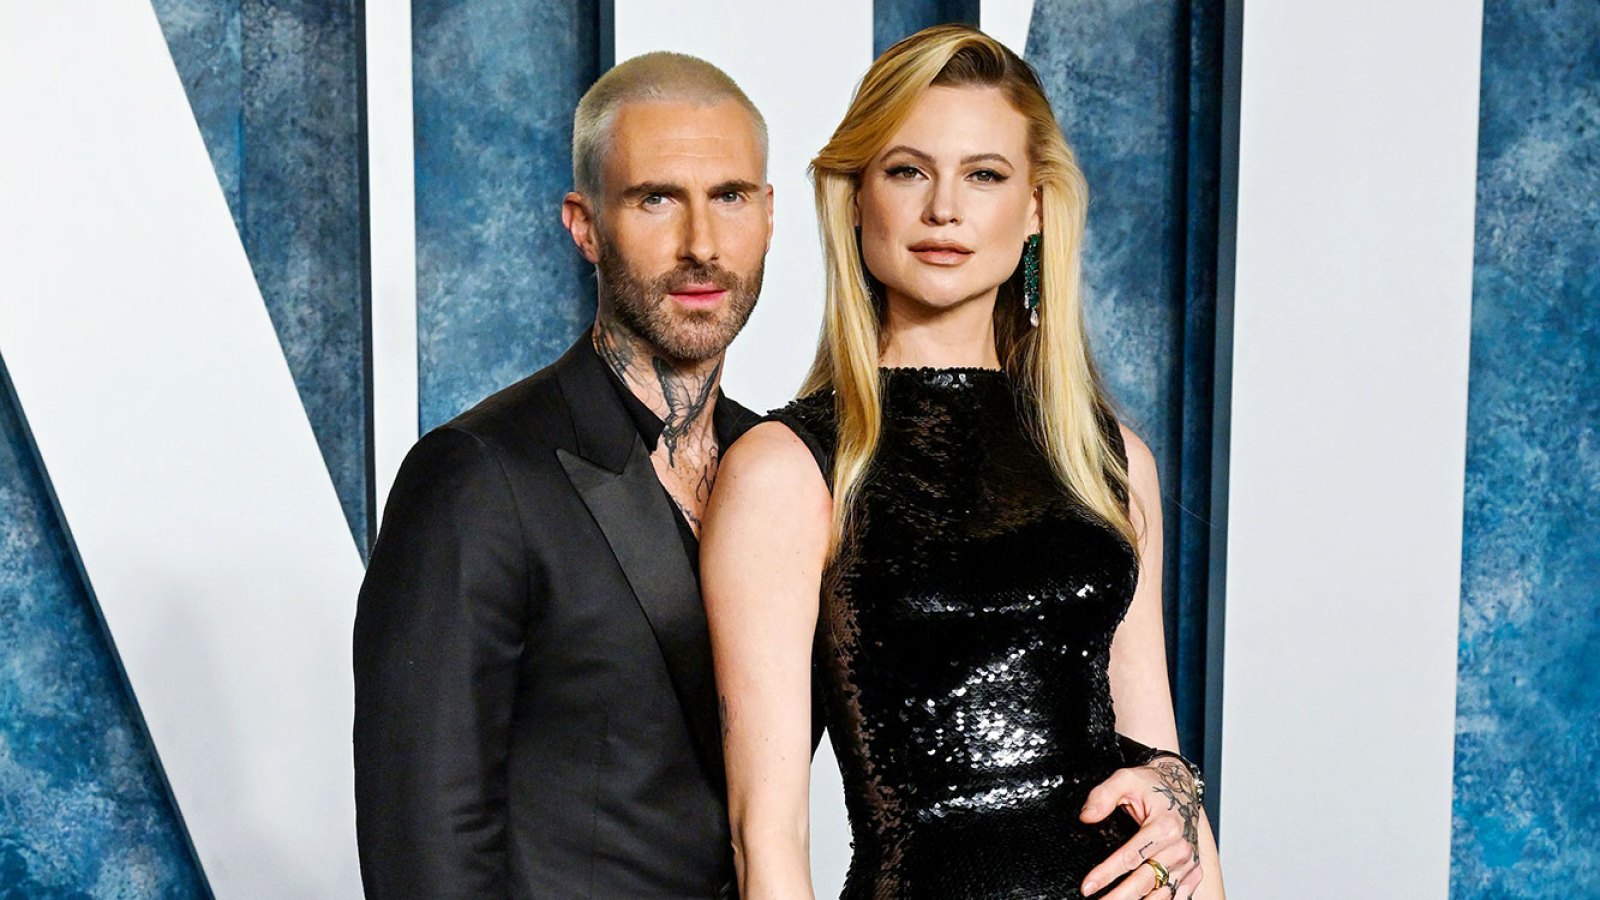 Behati Prinsloo Offers Glimpse at Her and Adam Levine Daughter Bonding With Newborn Baby